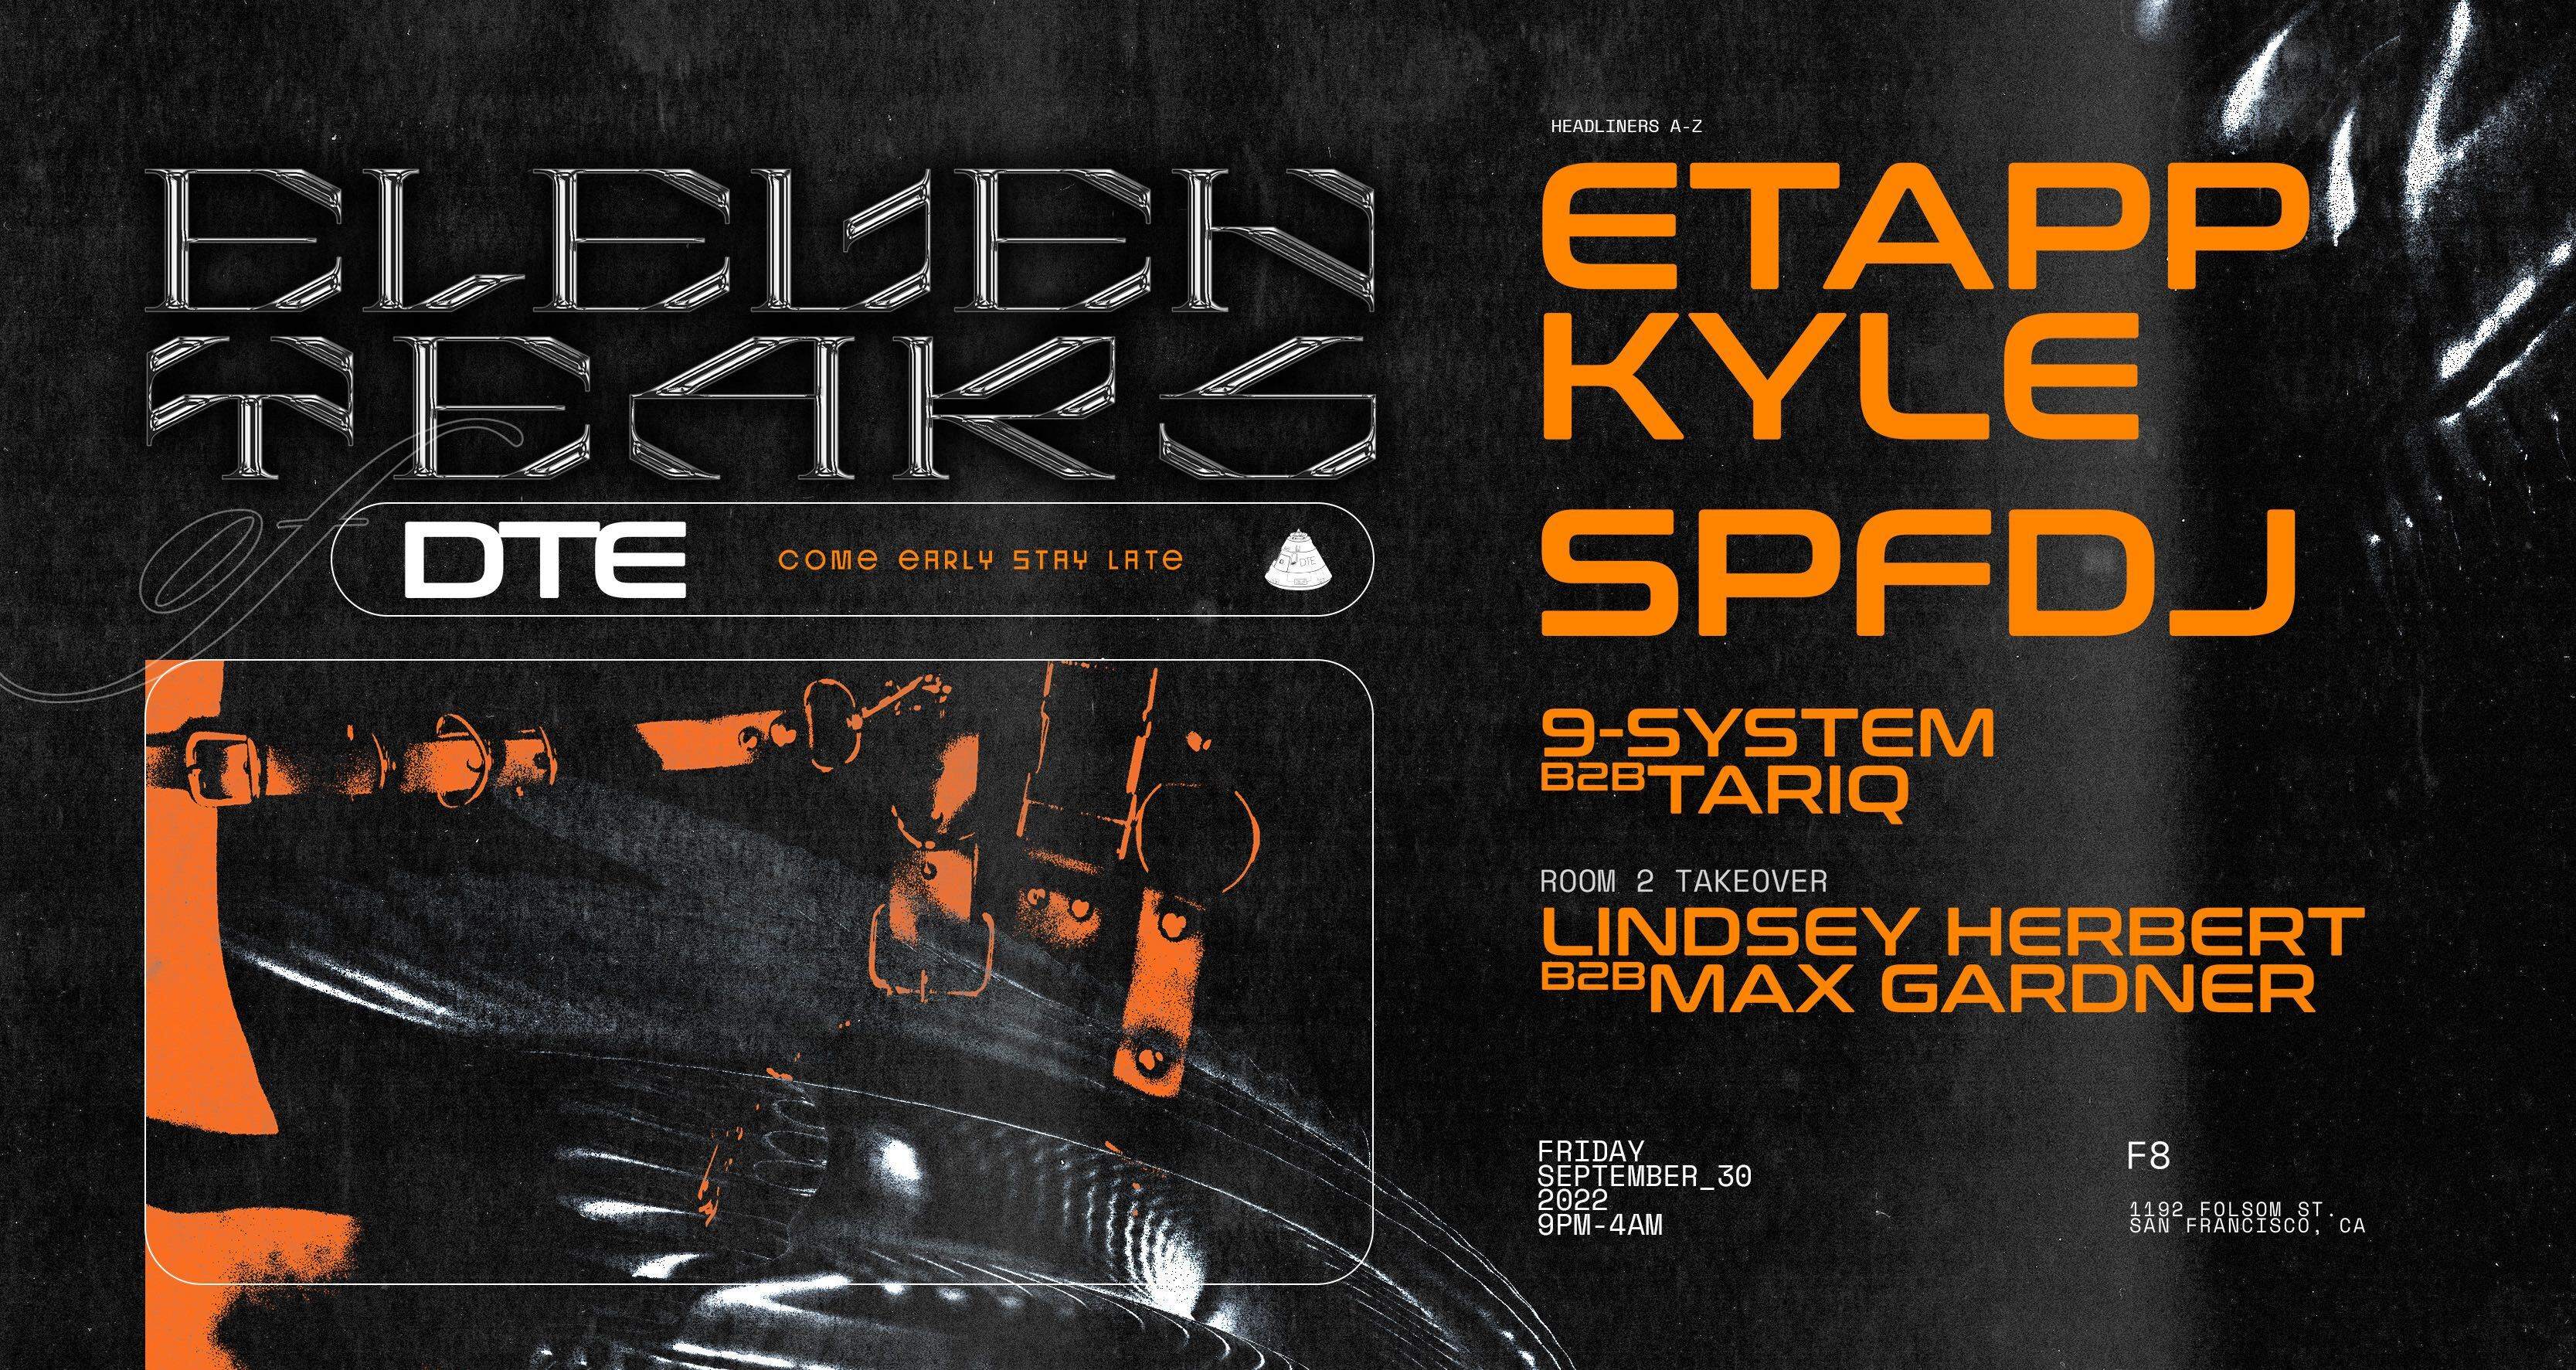 11 Years of Direct to Earth with Etapp Kyle and SPFDJ - Flyer back